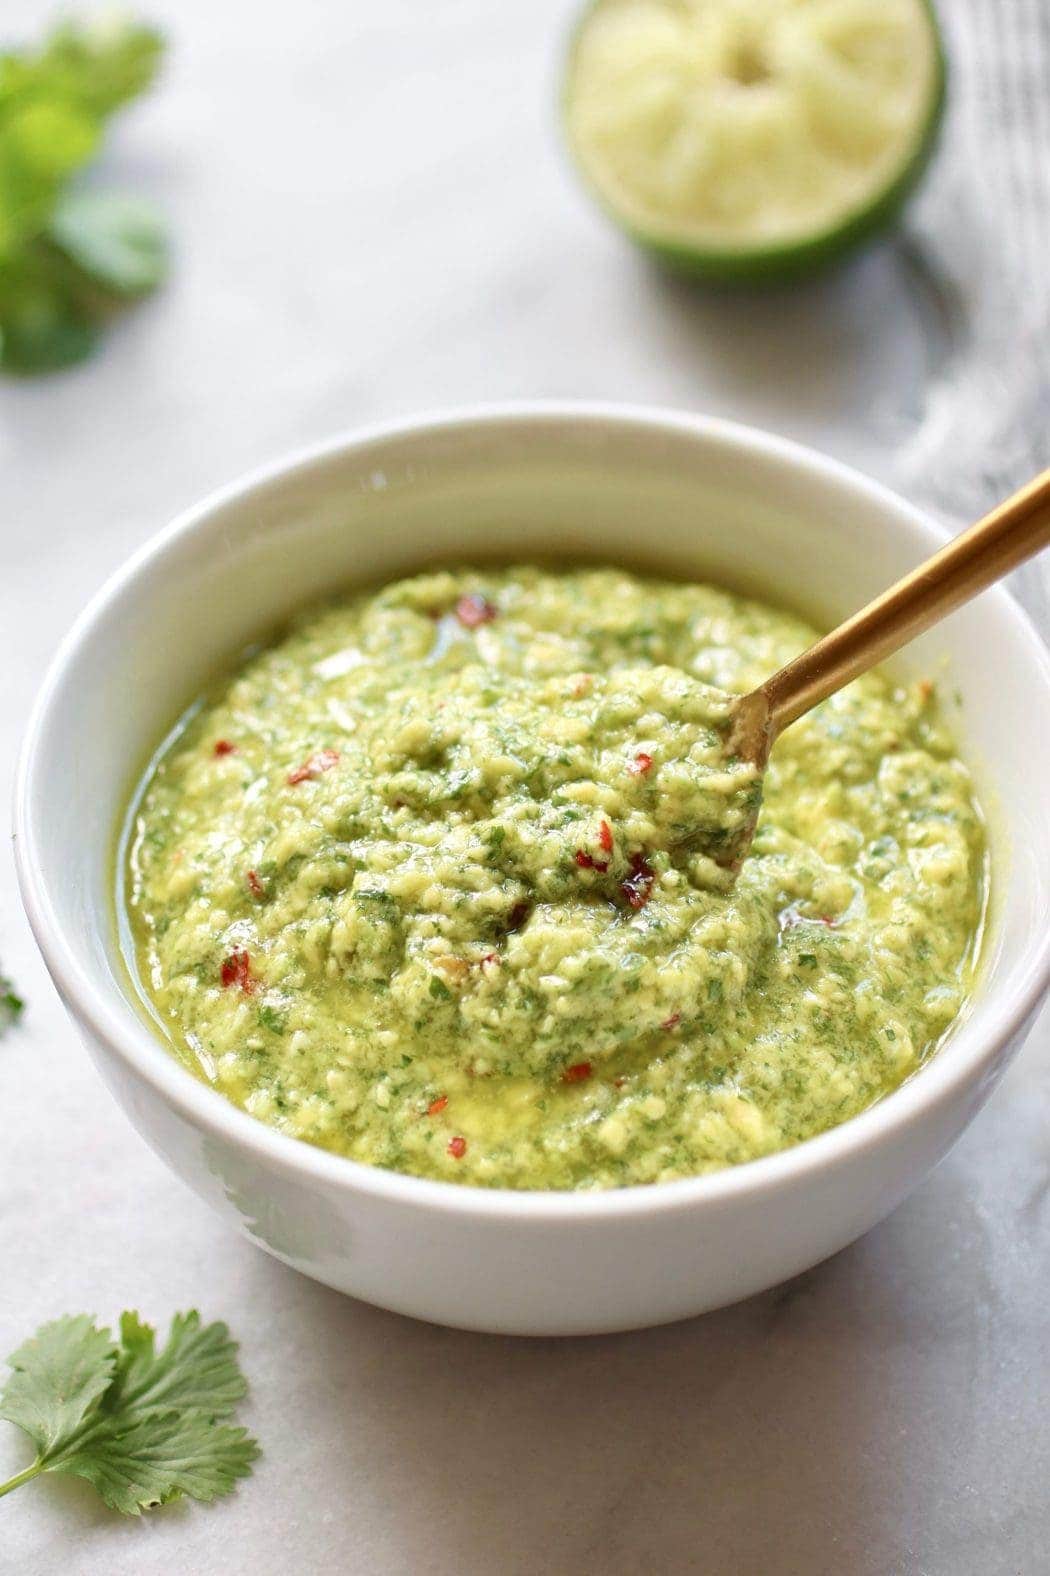 Easy Avocado Green Sauce - The Real Food Dietitians